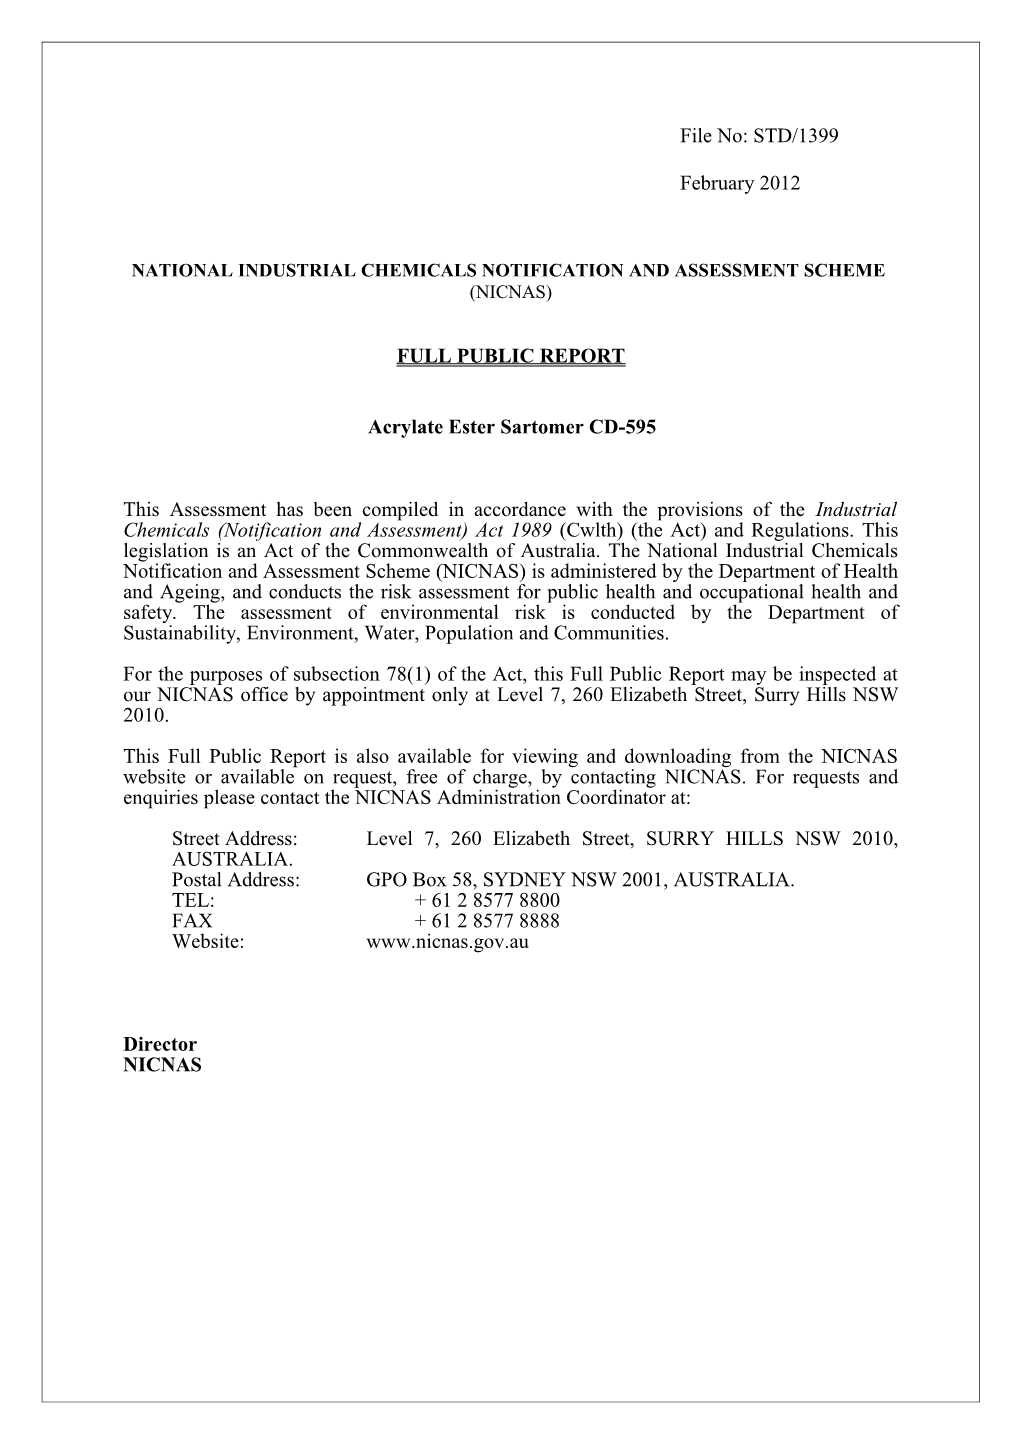 National Industrial Chemicals Notification and Assessment Scheme s17